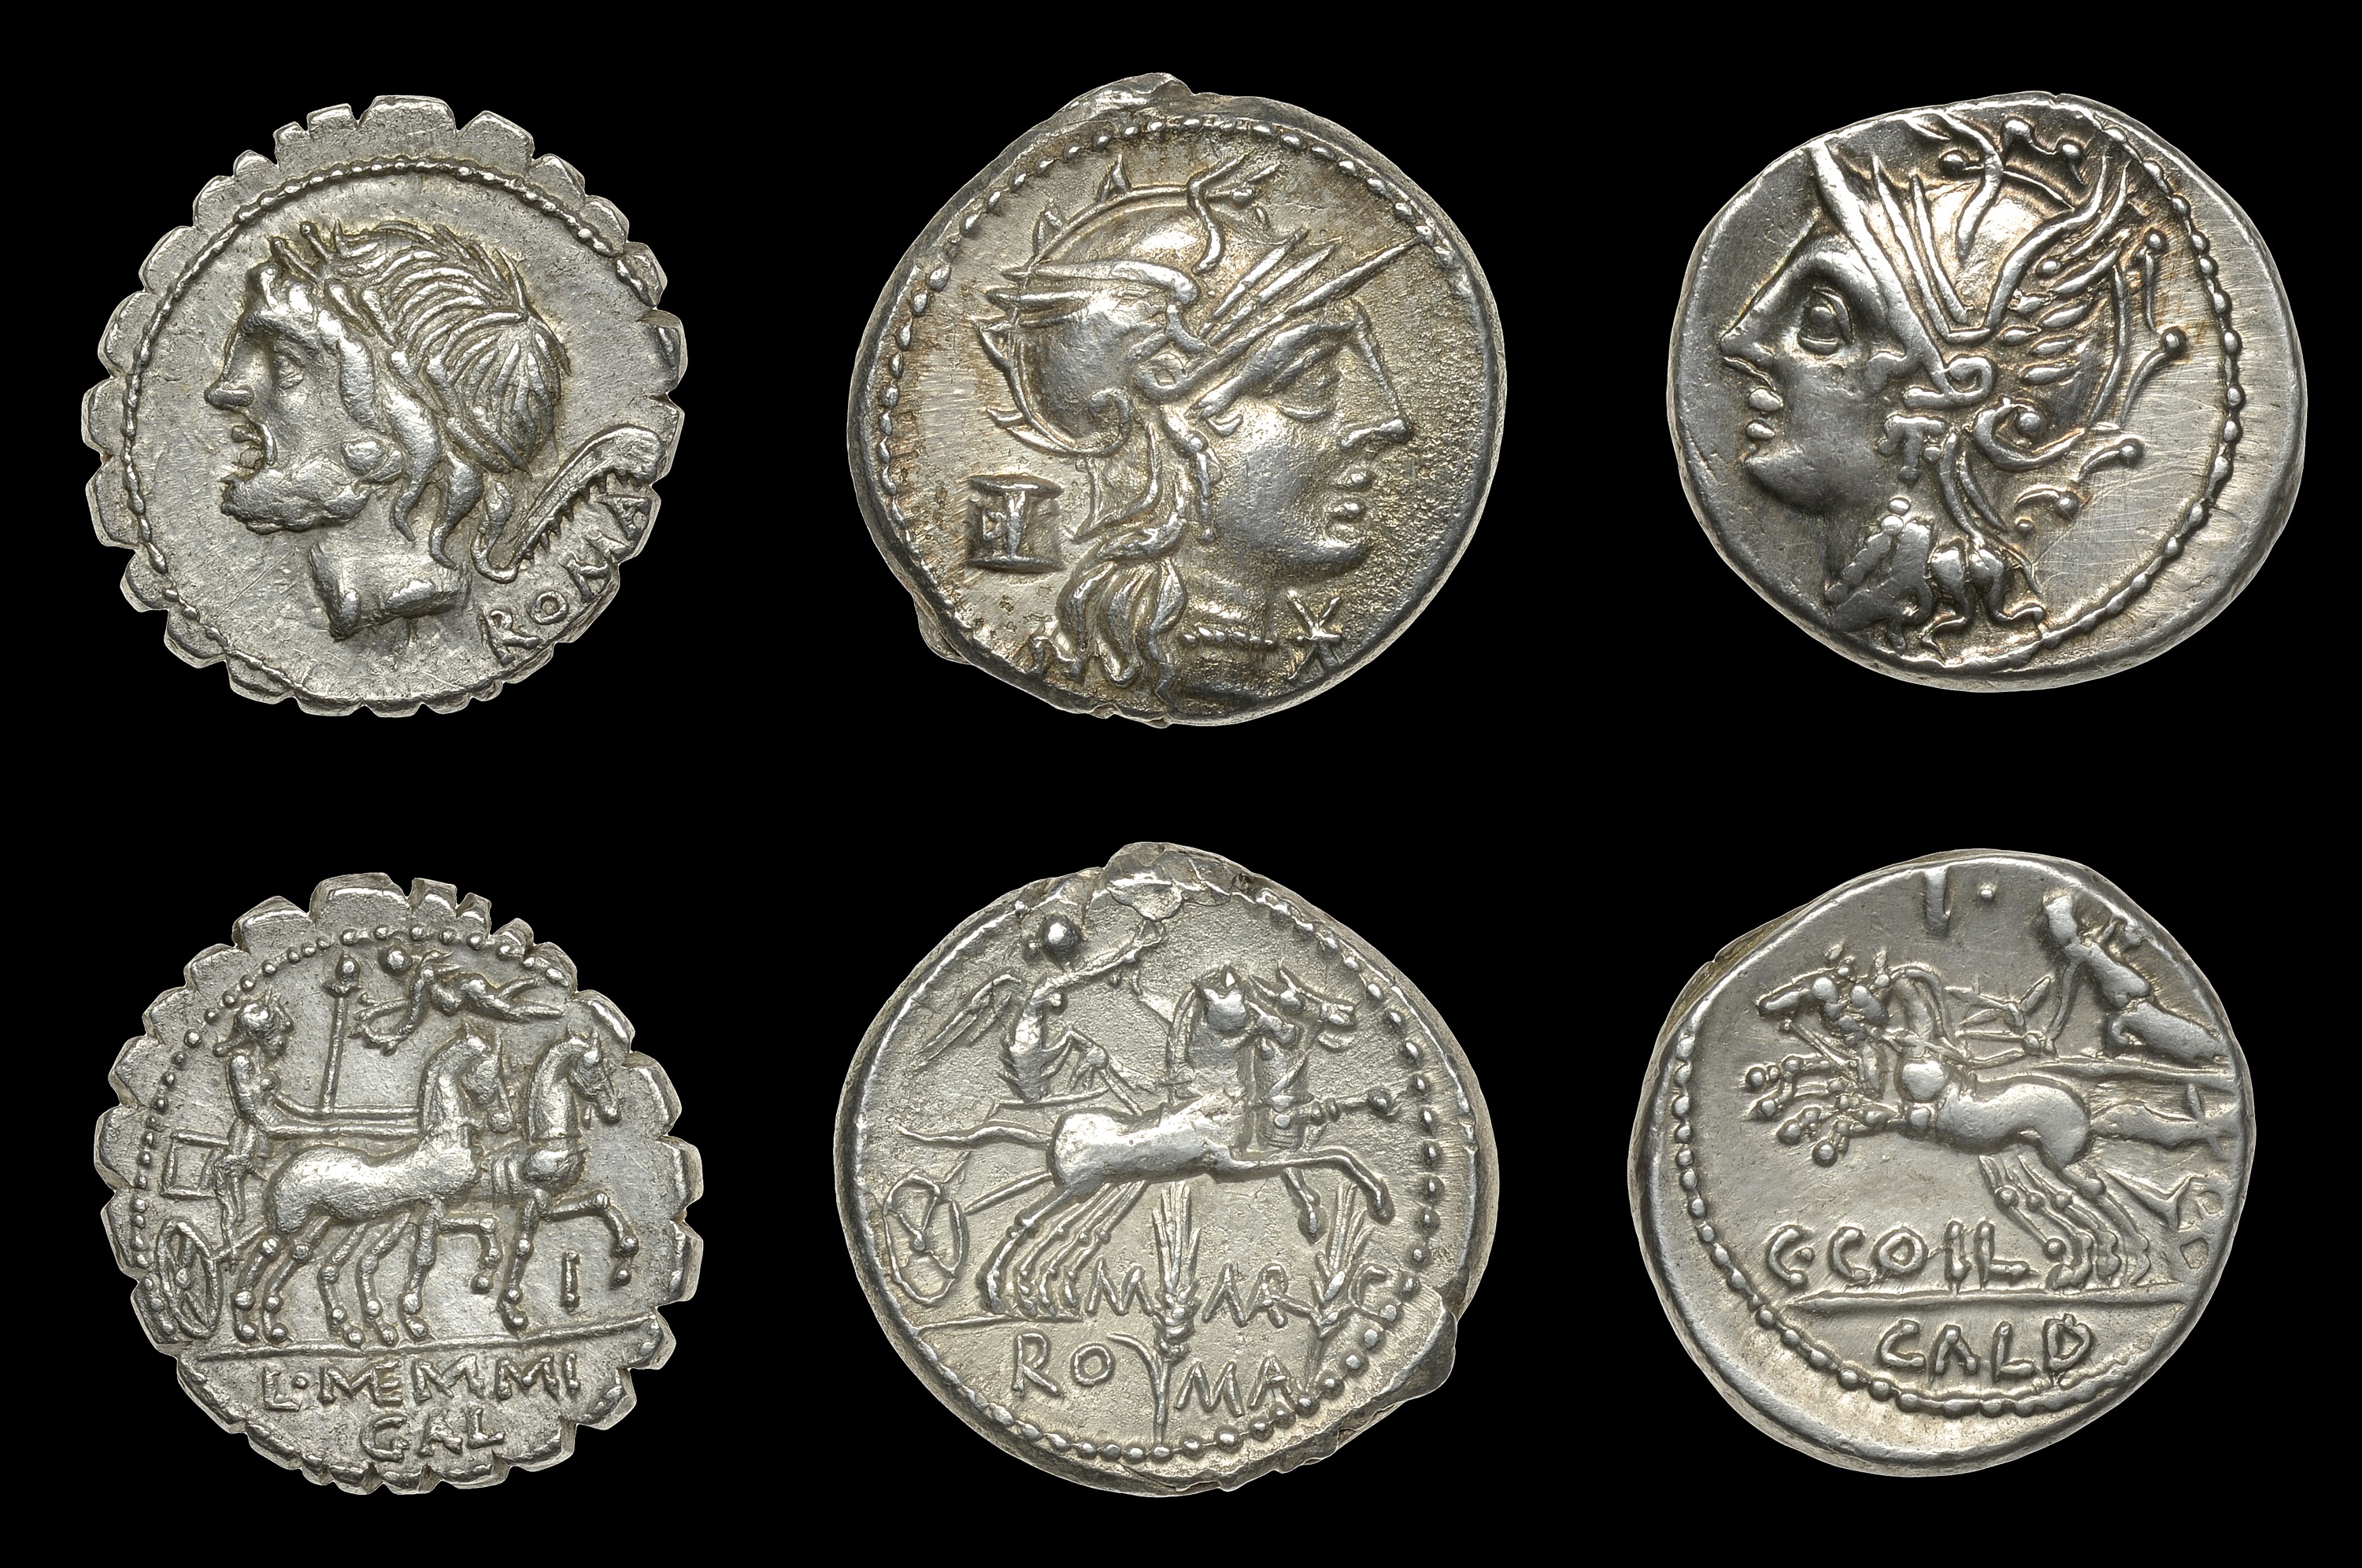 The Brian and Veronica Dawson Collection of Ancient Coins